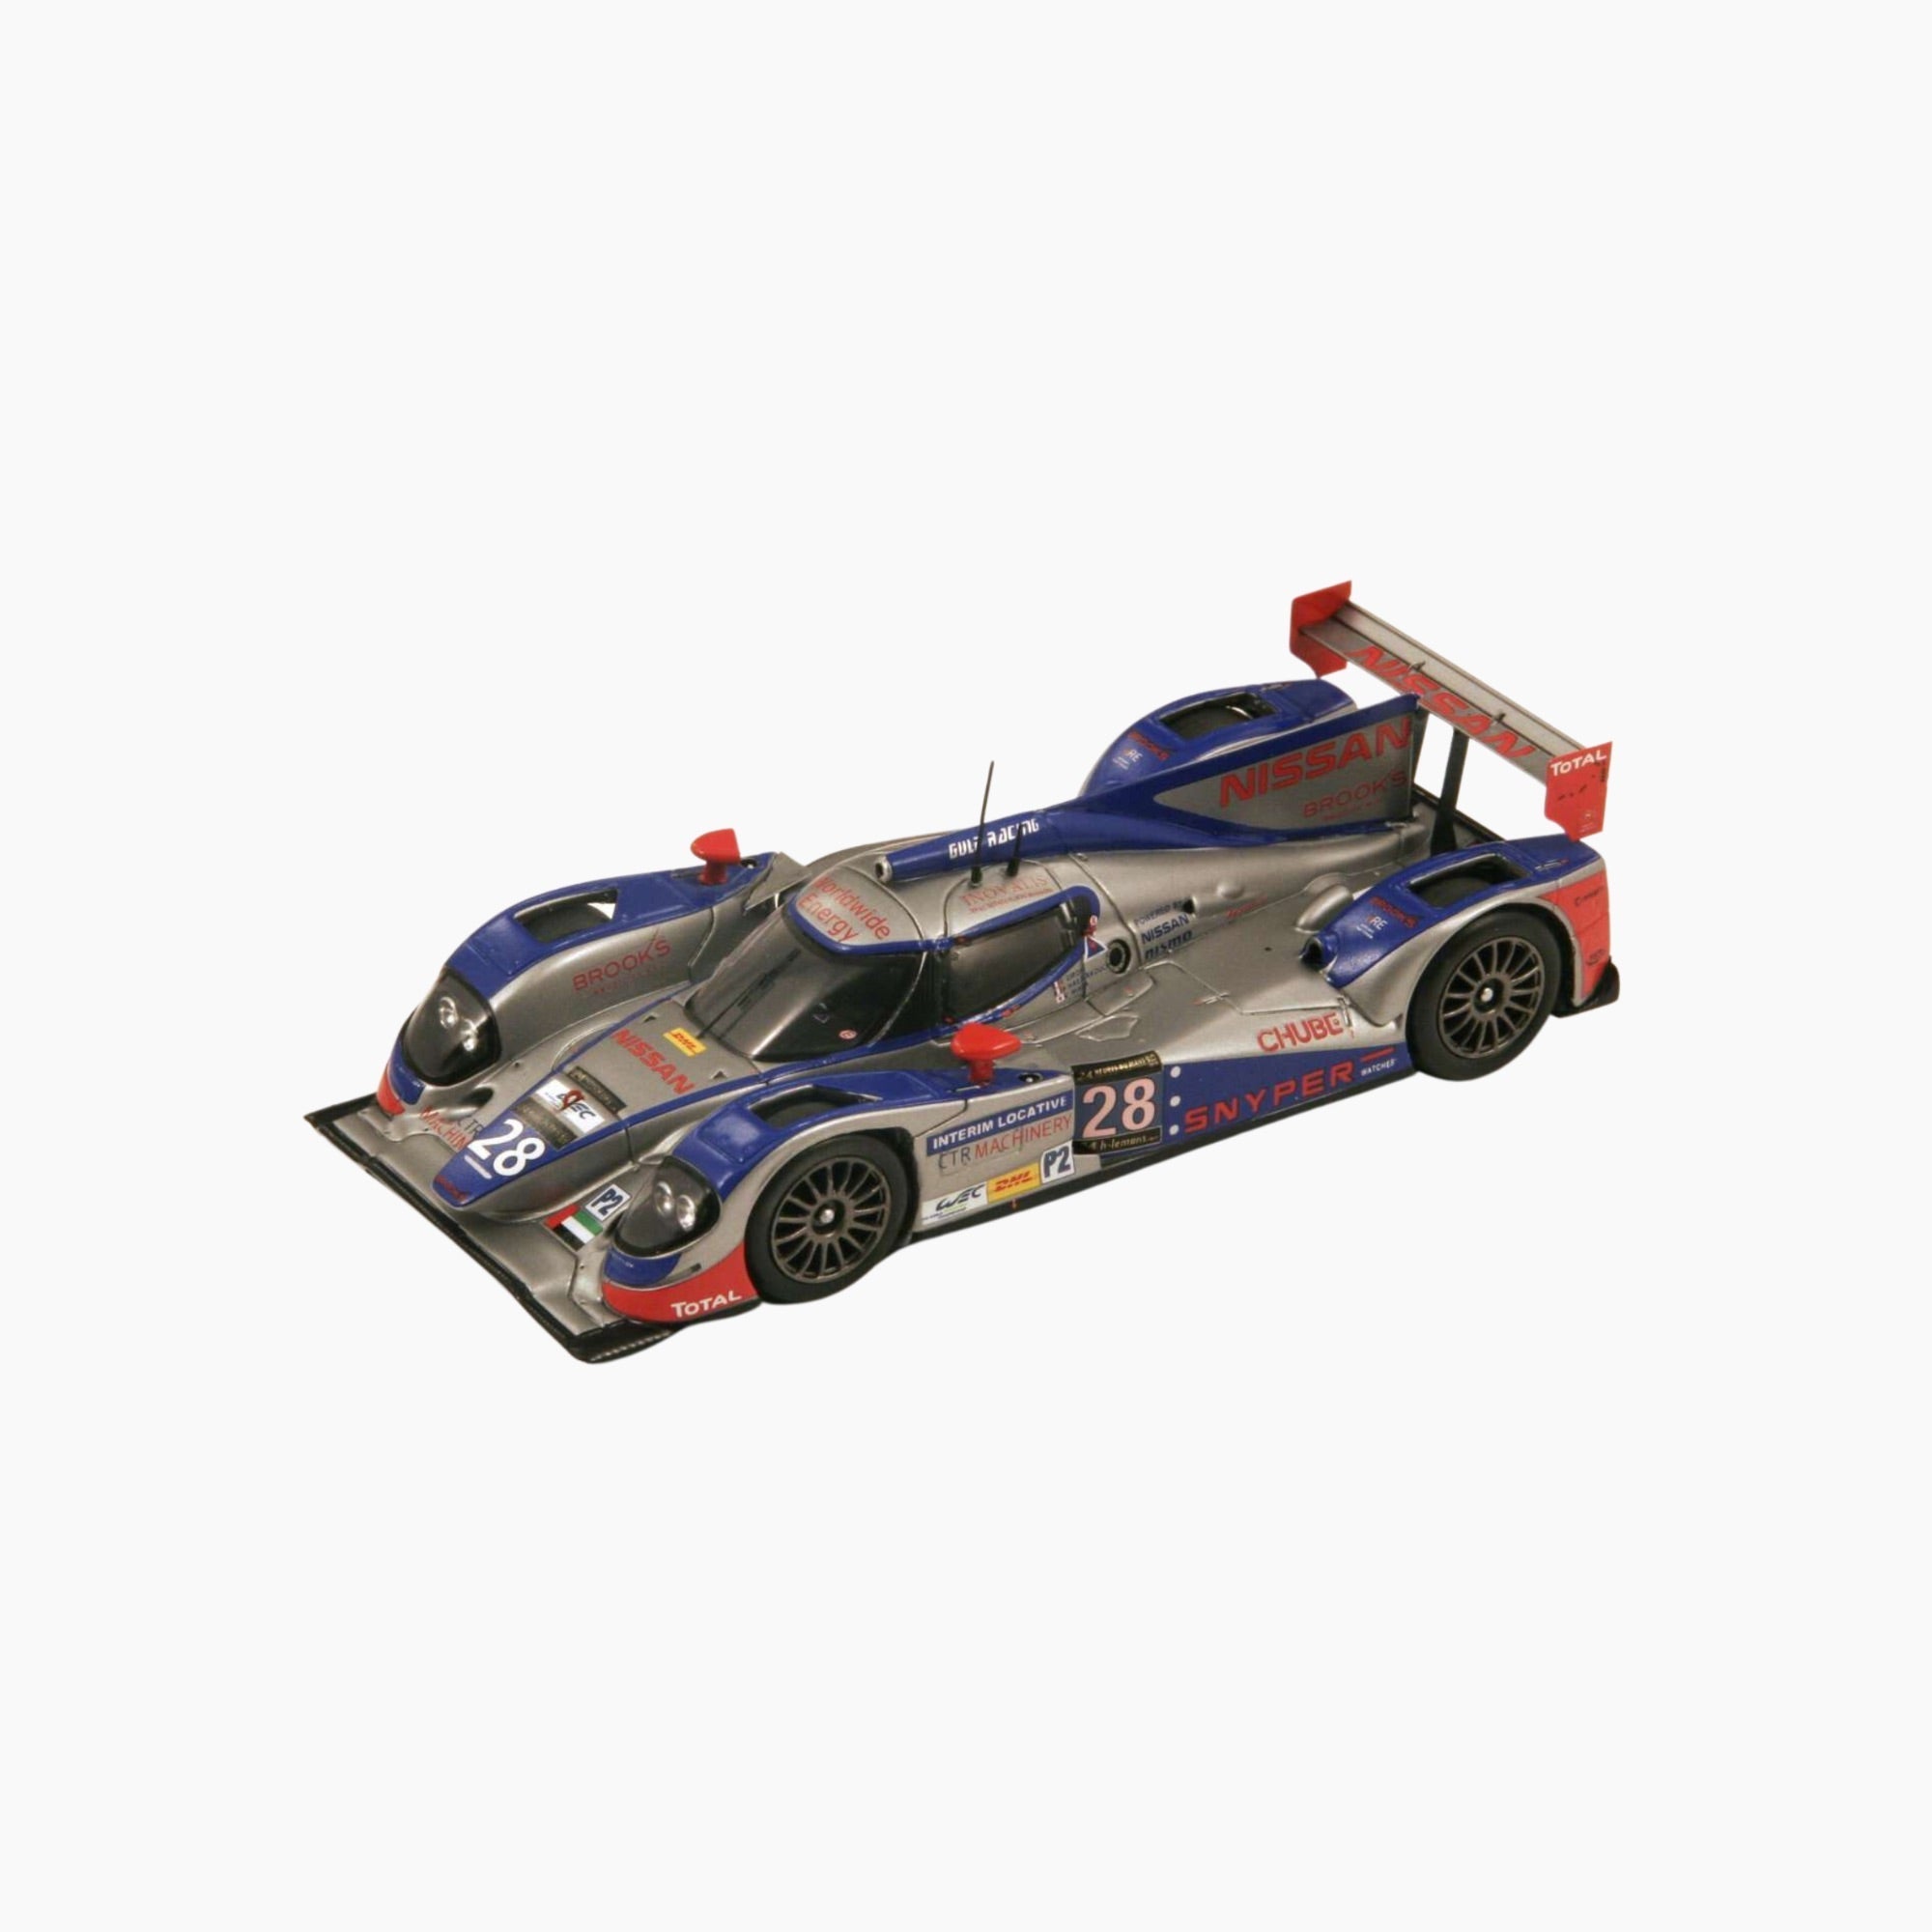 Lola B12/60 Nissan Gulf Racing Middle East No28 LM 2013 1:43 | 1:43 Scale Model-1:43 Scale Model-Spark Models-gpx-store